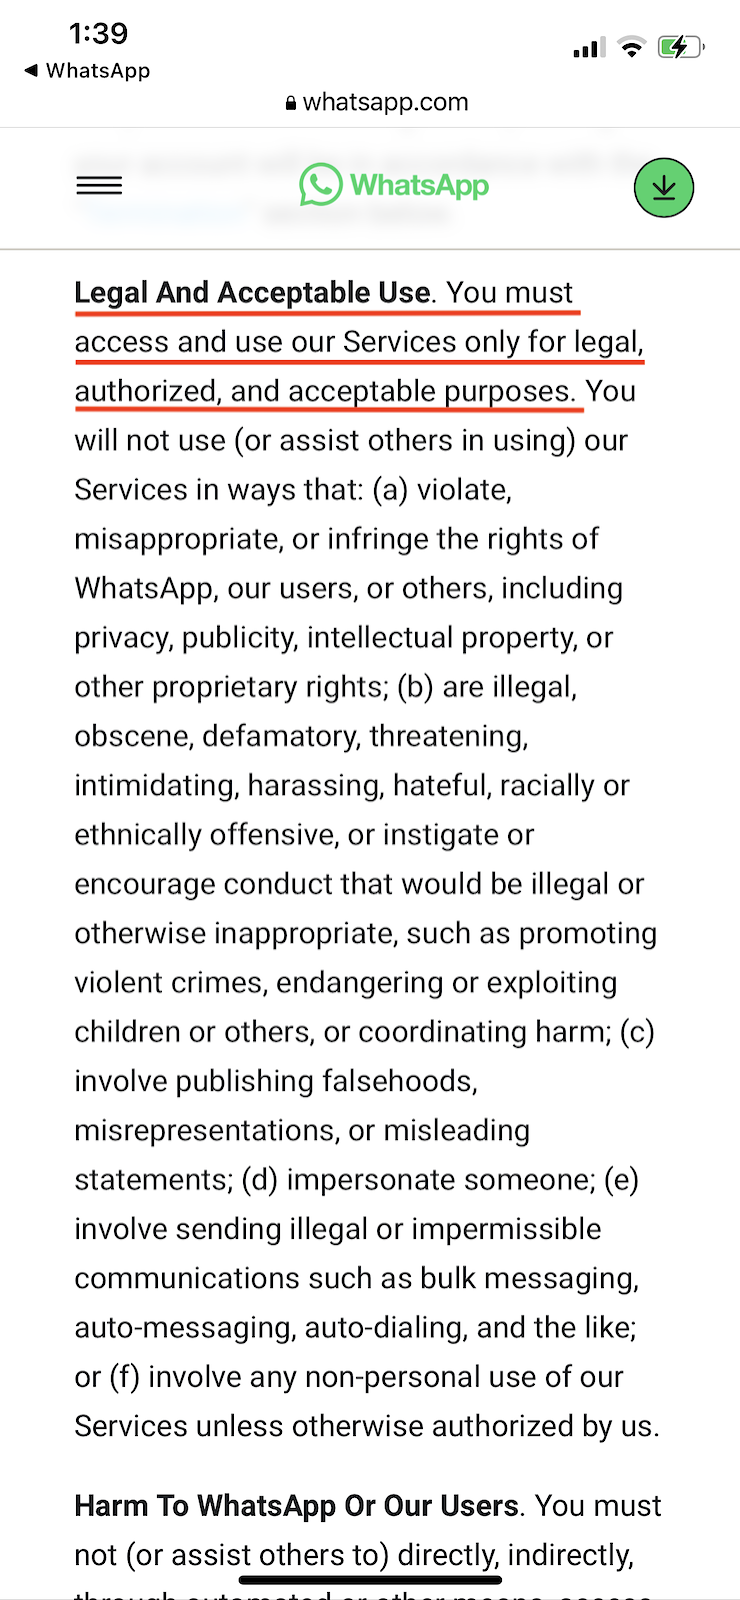 WhatsApp-terms-and-conditions